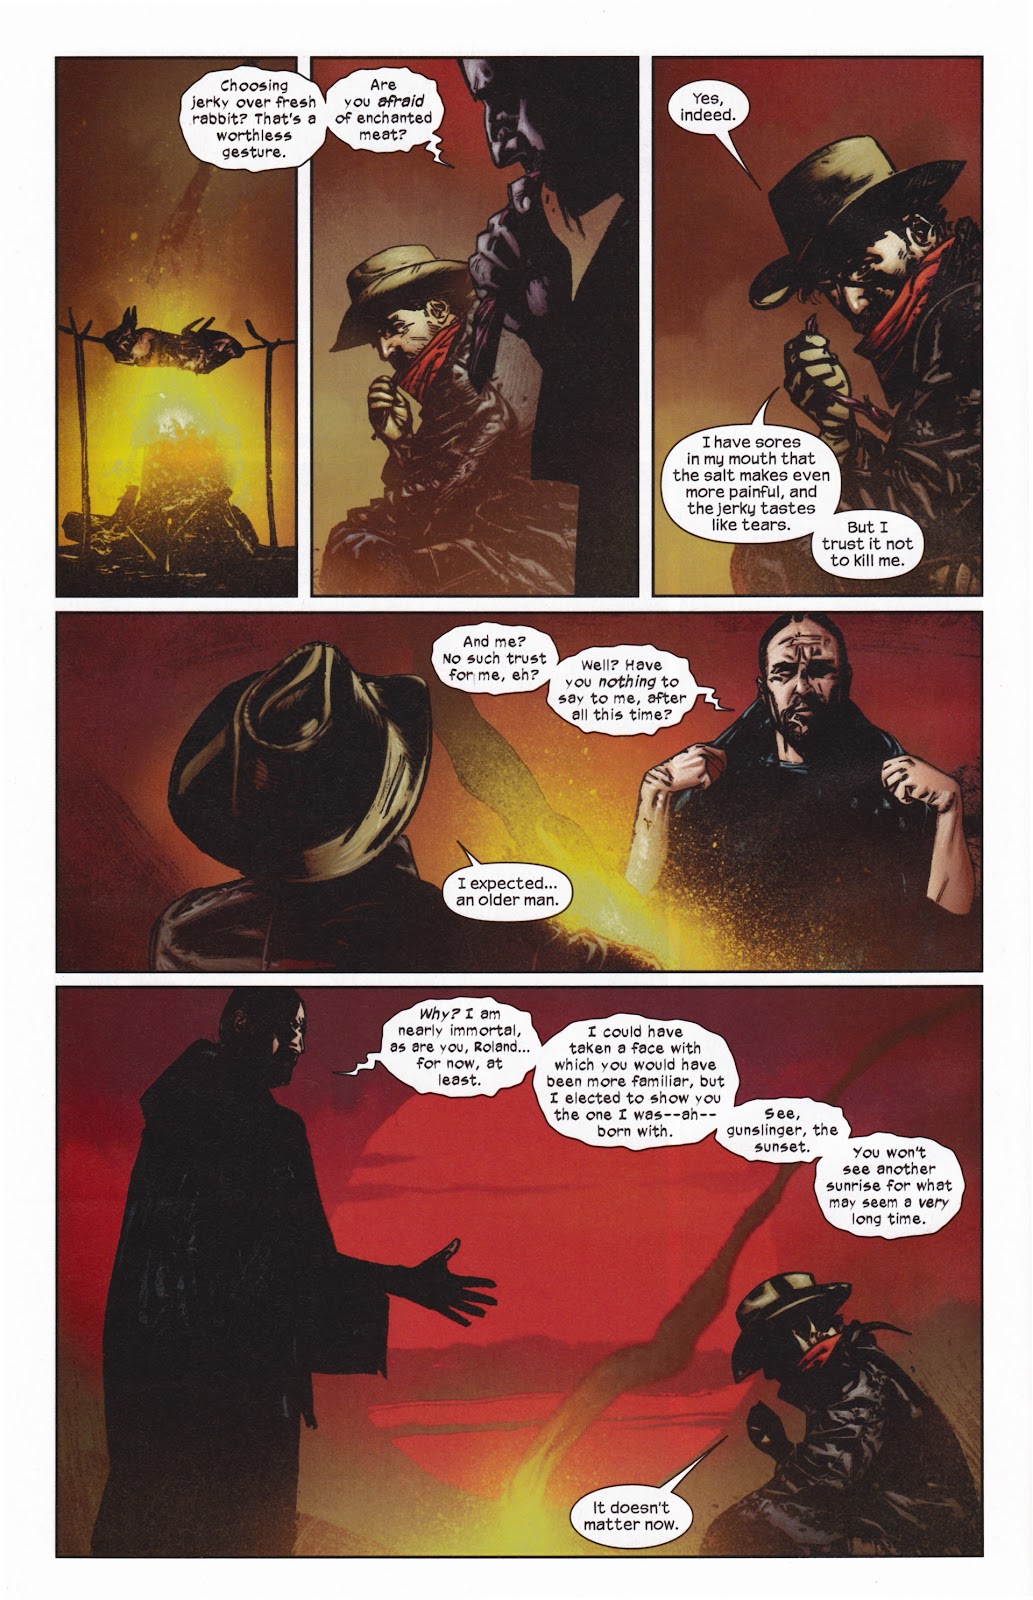 Dark Tower: The Gunslinger - The Man in Black issue 5 - Page 7